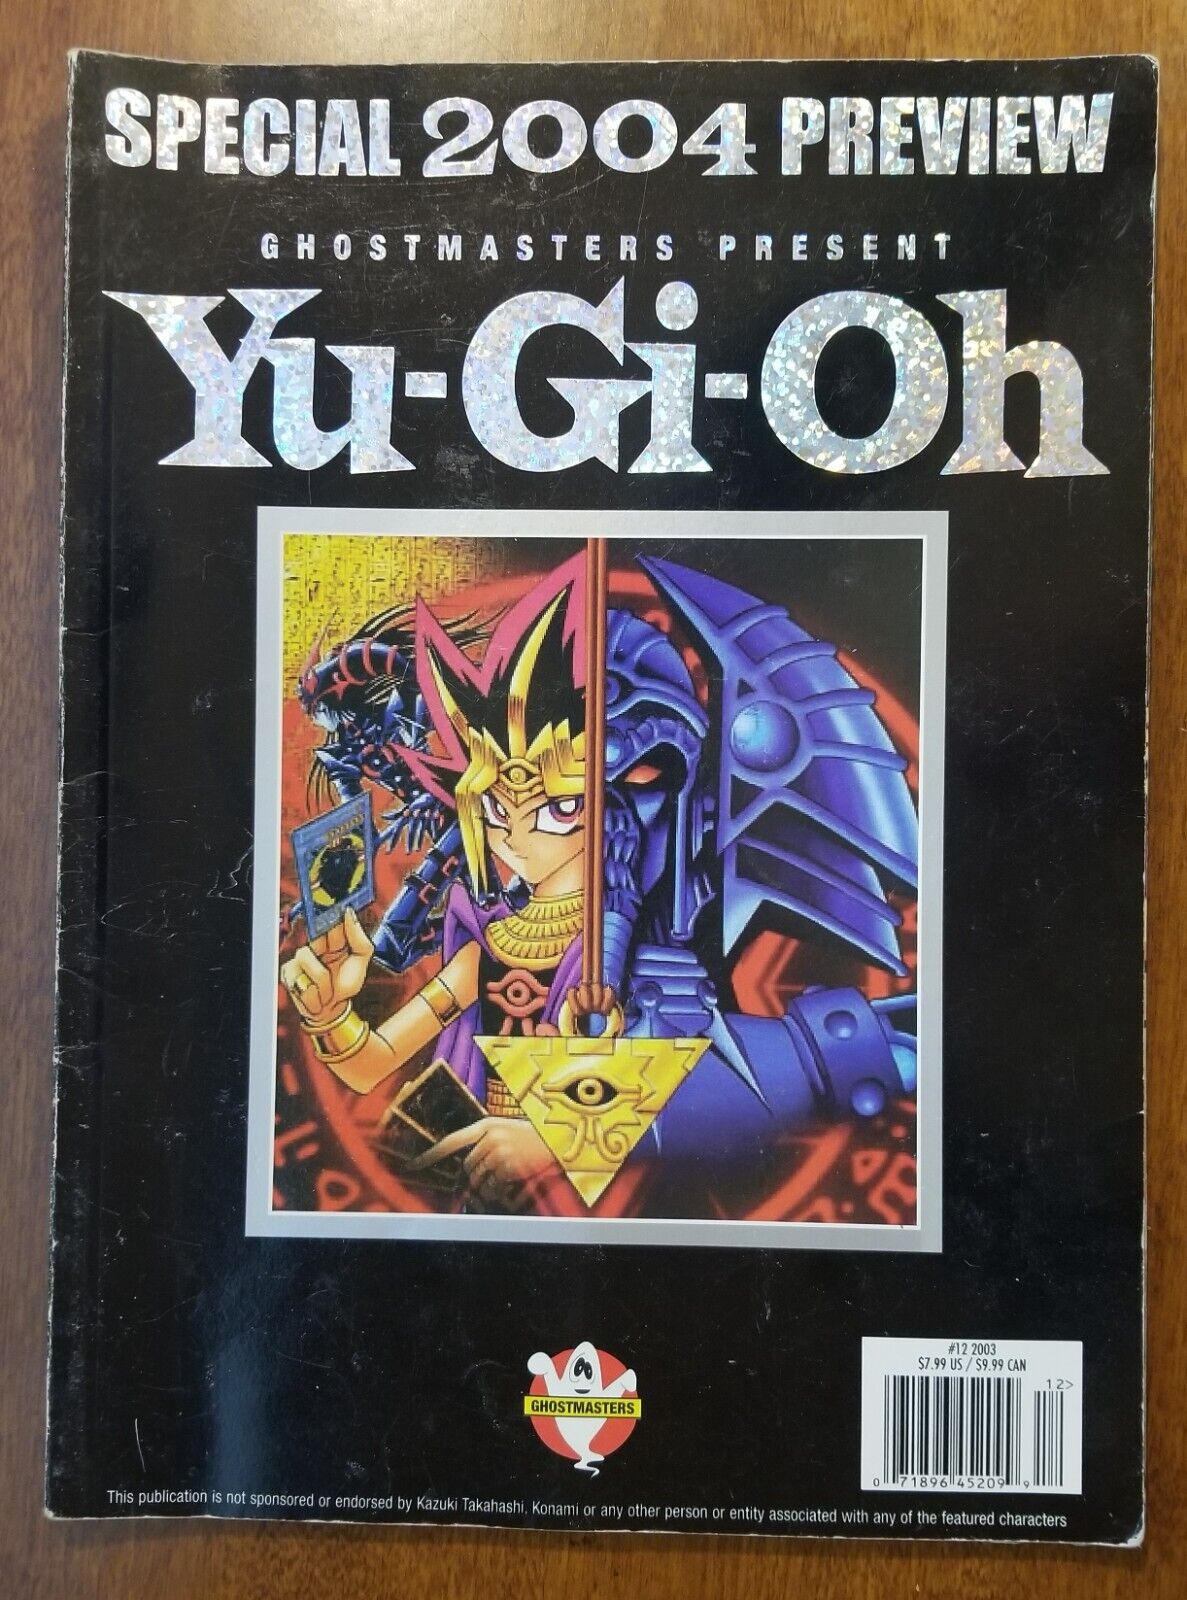 Ghostmasters Present Yu-Gi-Oh Special 2004 Preview Collector’s Edition